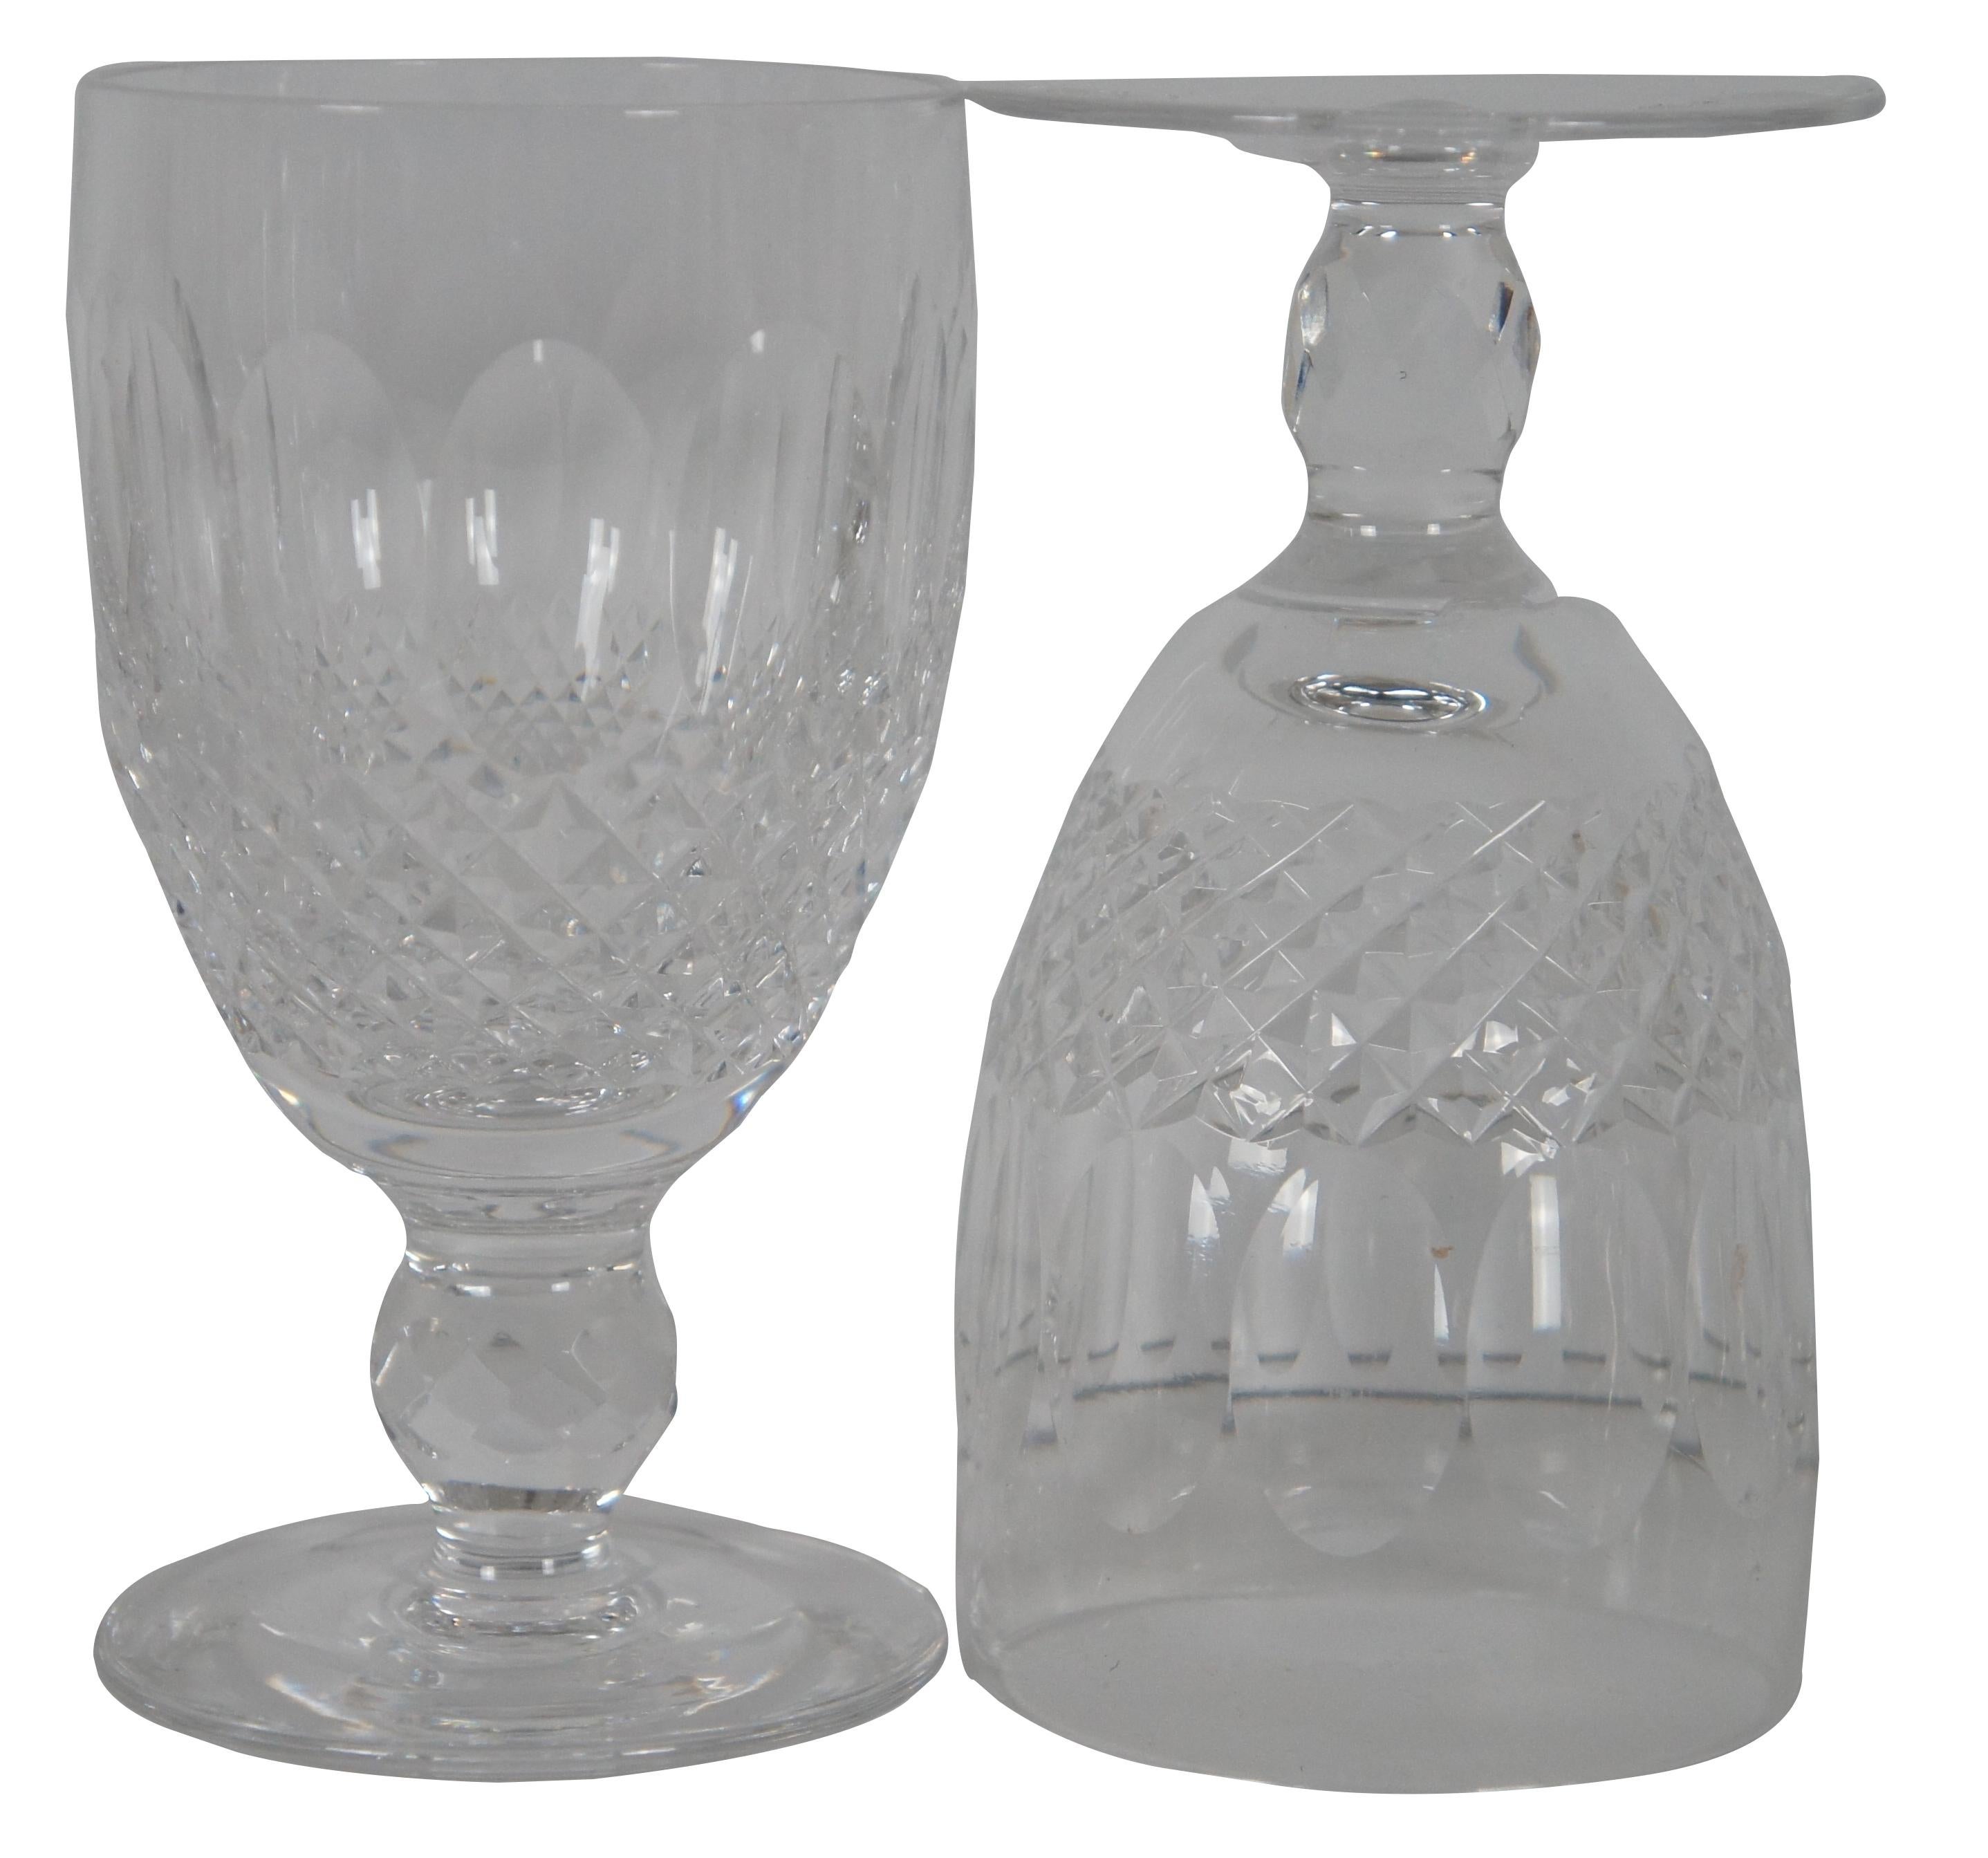 Set of ten Waterford cut crystal short stem white wine goblets in the Colleen pattern. Measure: 4.75